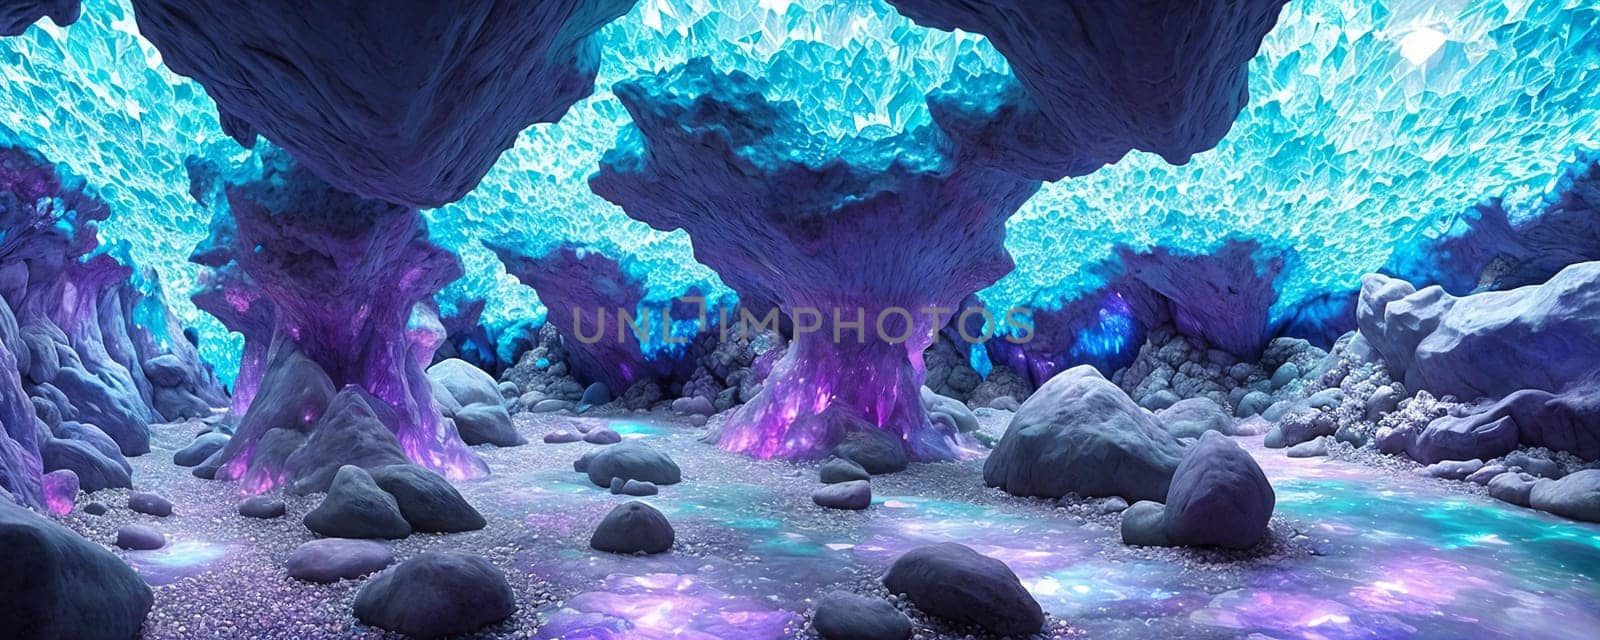 Crystal Cave, a subterranean world filled with shimmering crystal formations by GoodOlga